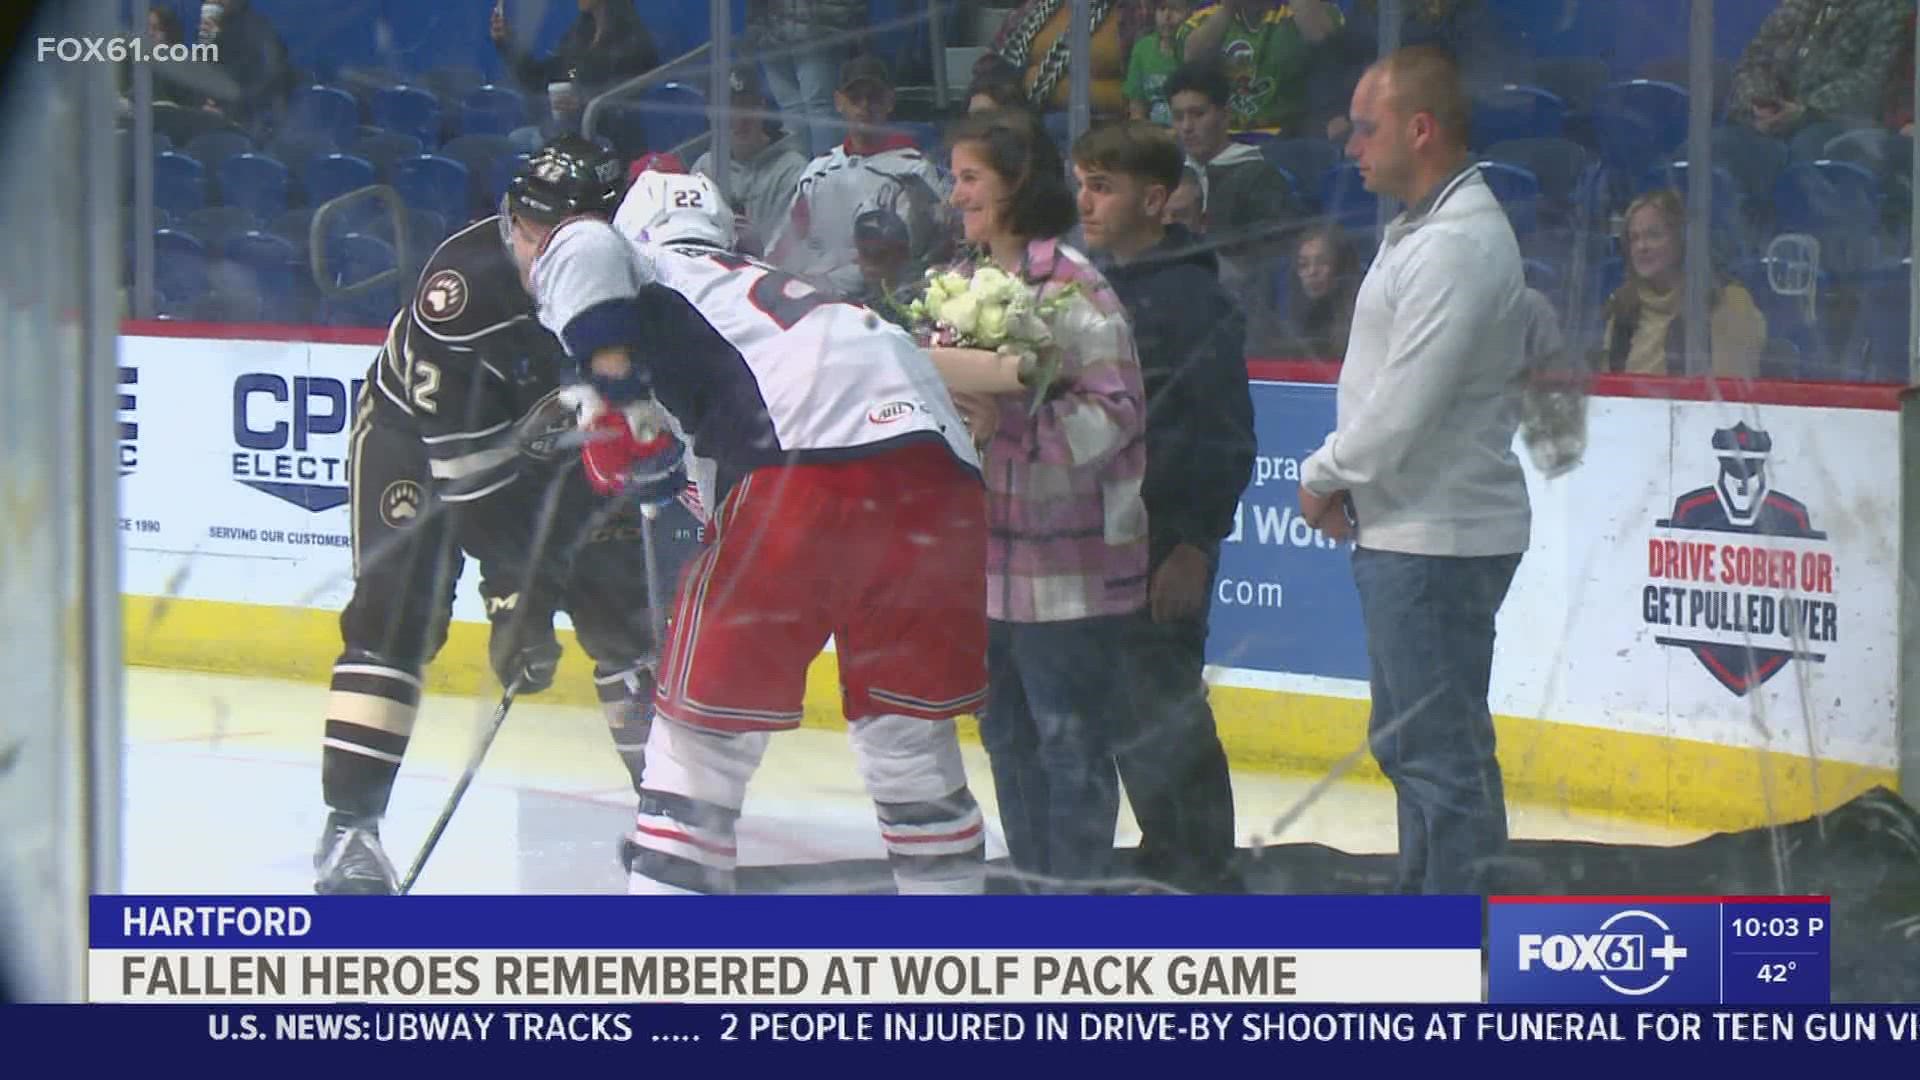 Laura DeMonte, the wife of Lt. Dustin Demonte, dropped the ceremonial puck before the game.